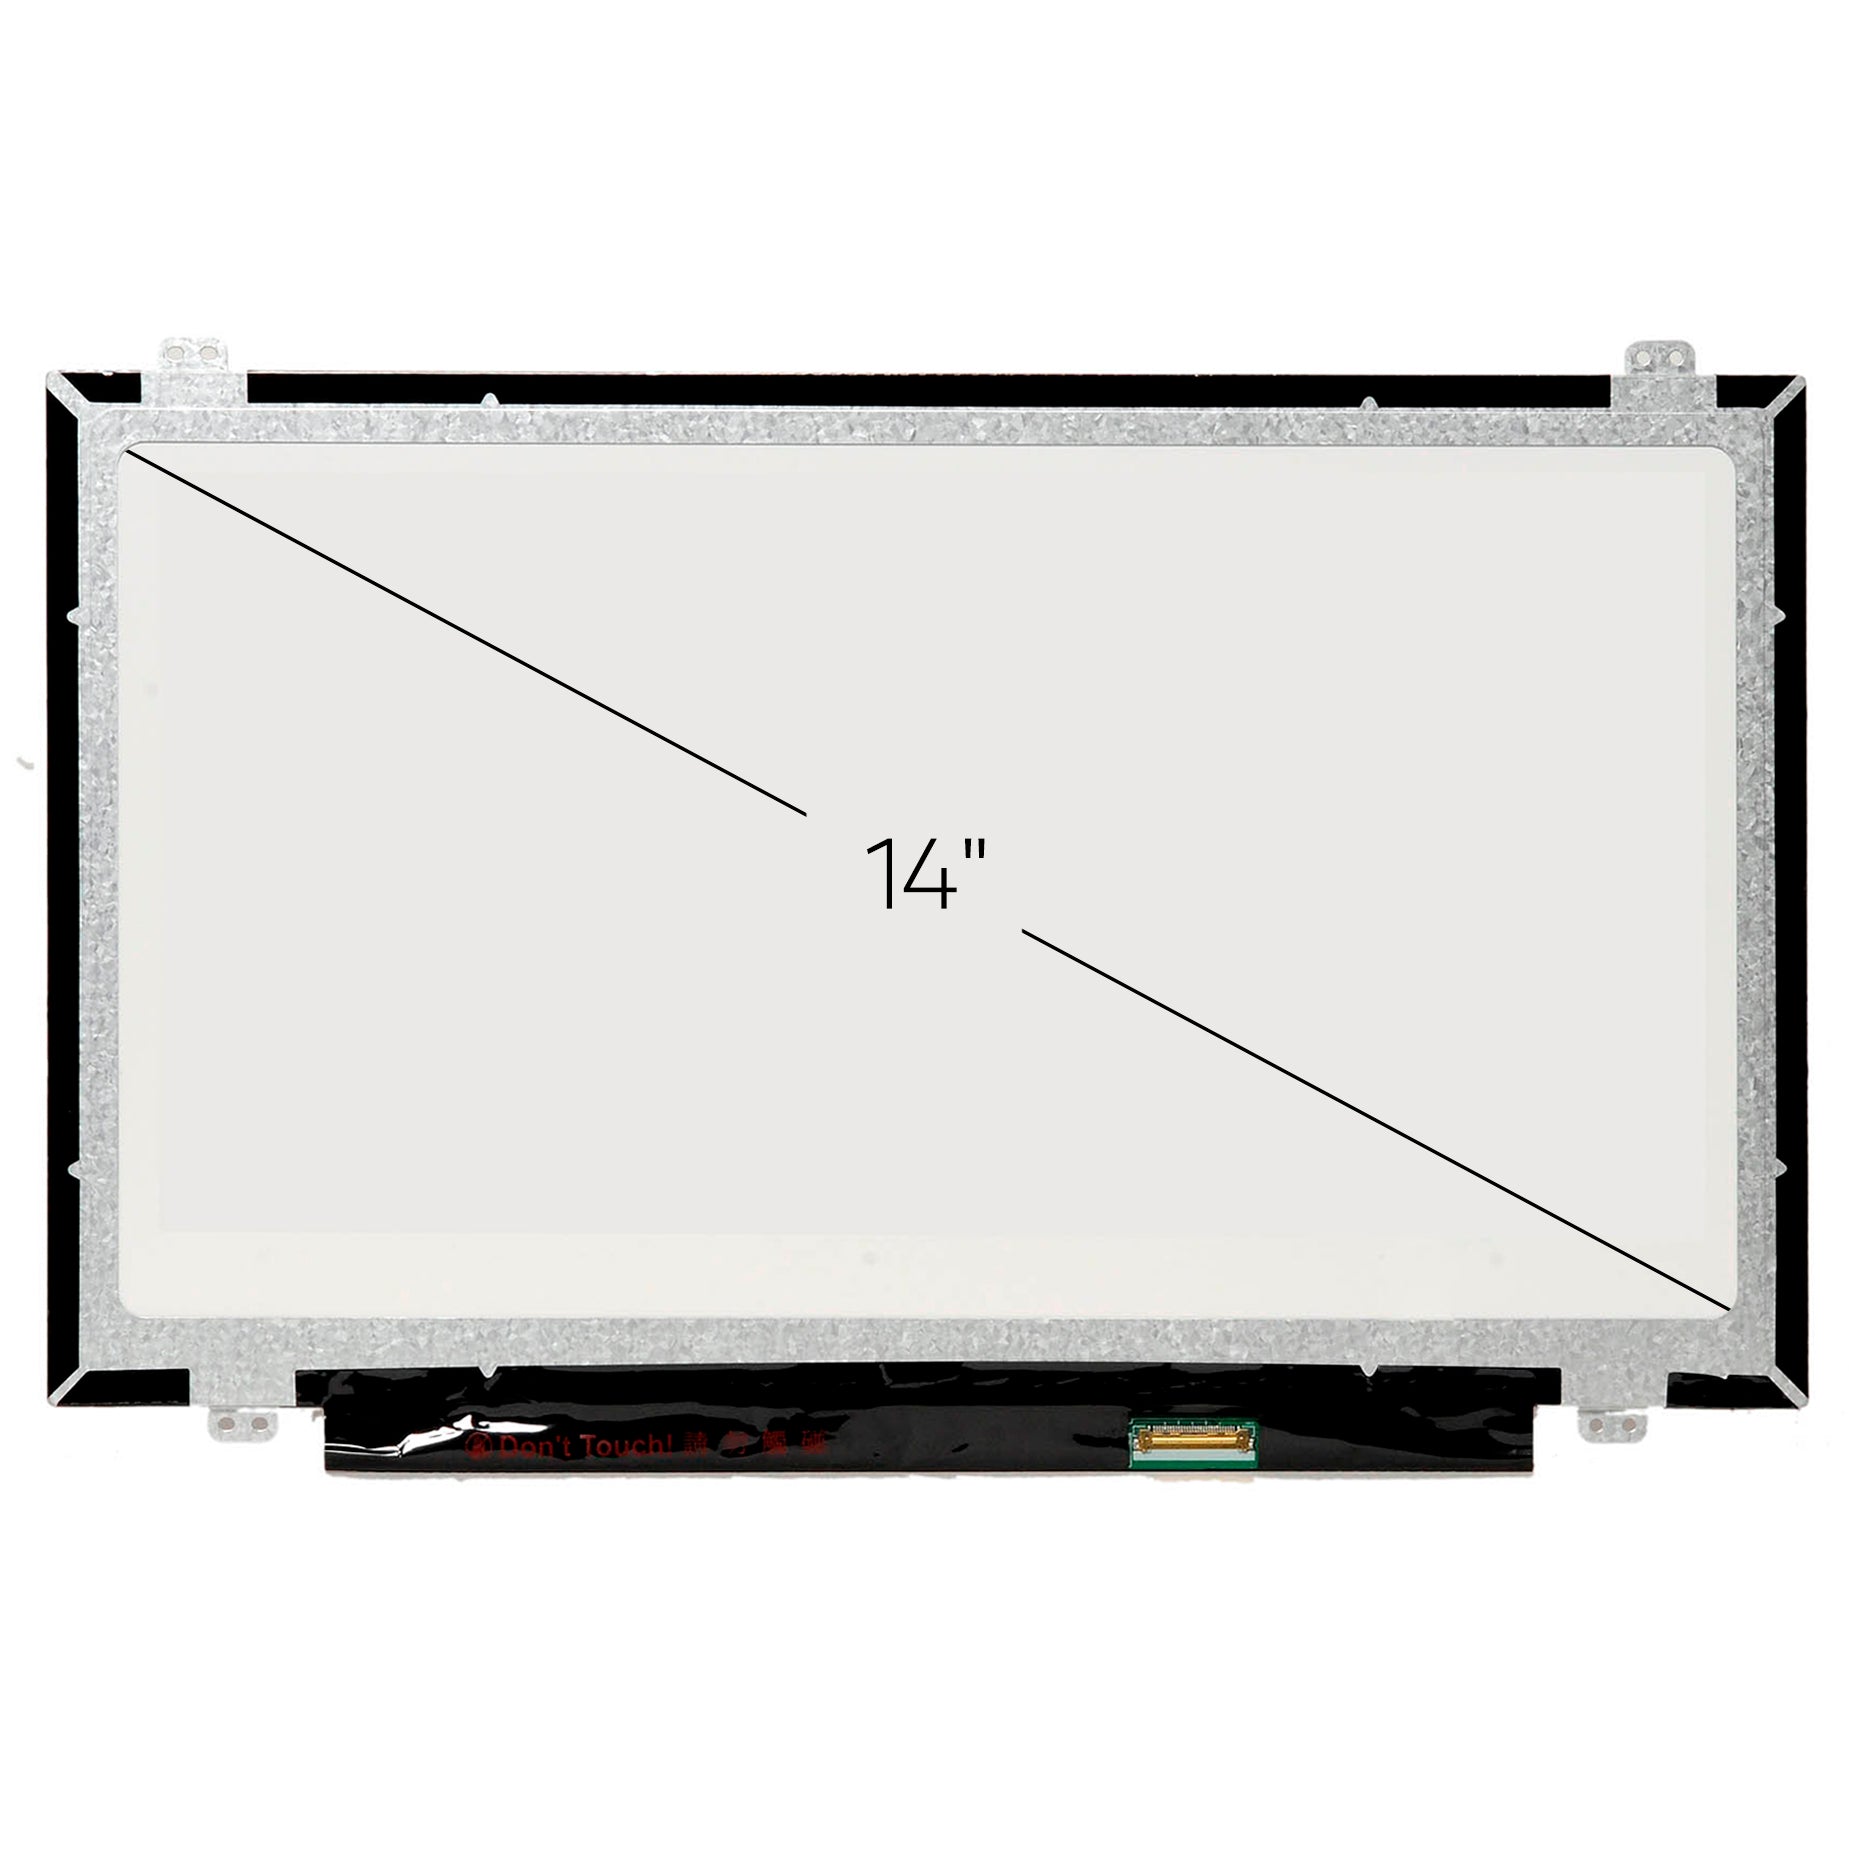 Screen Replacement for LP140WH8(TP)(A1) HD 1366x768 Glossy LCD LED Display